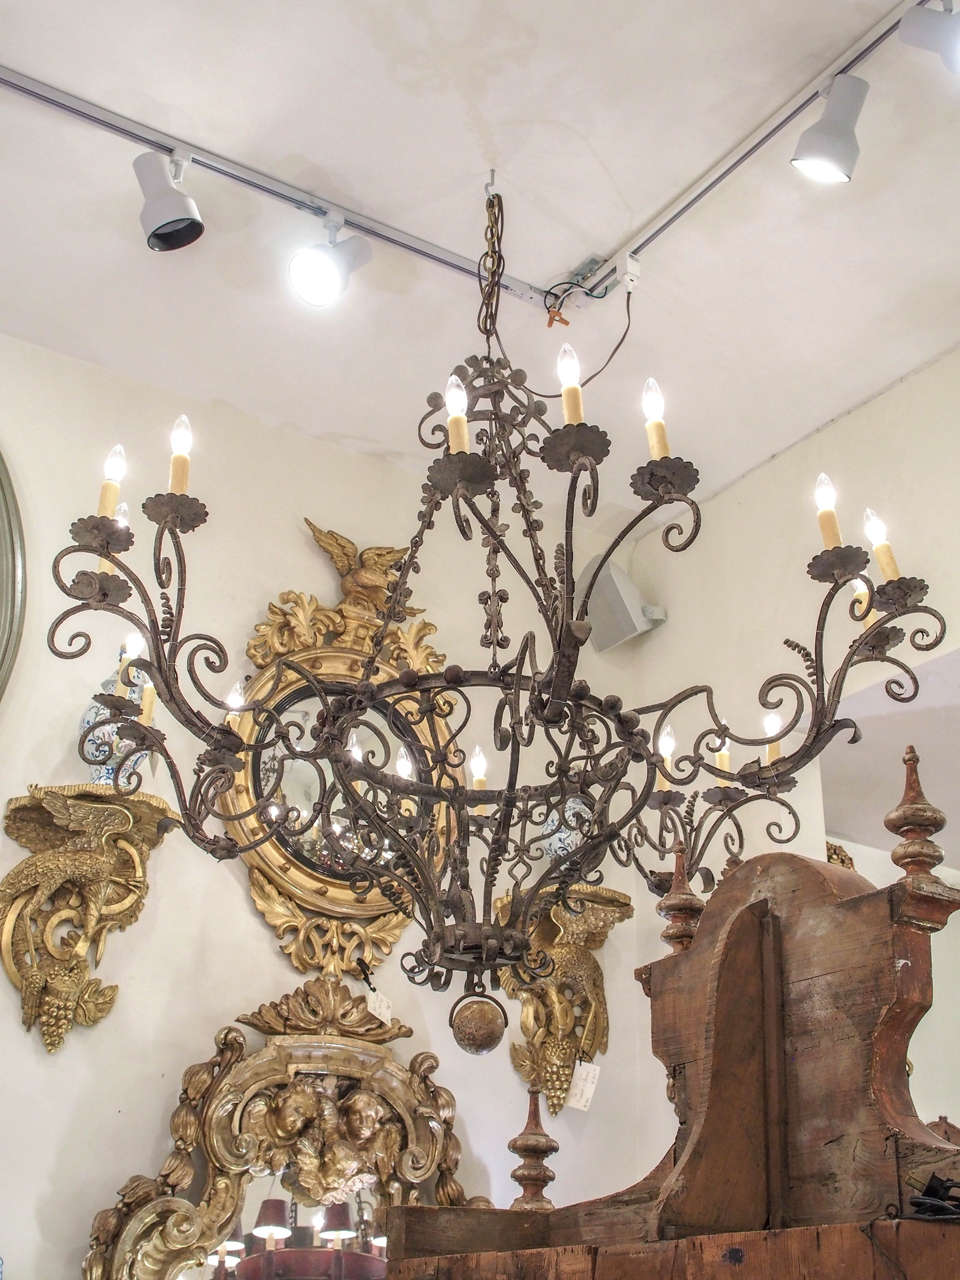 Exceptional Italian hand-wrought iron chandelier from the late18th century-early 19th century with 18 lights.
The entire frame is hand-wrought iron with a water gilt ball finial.